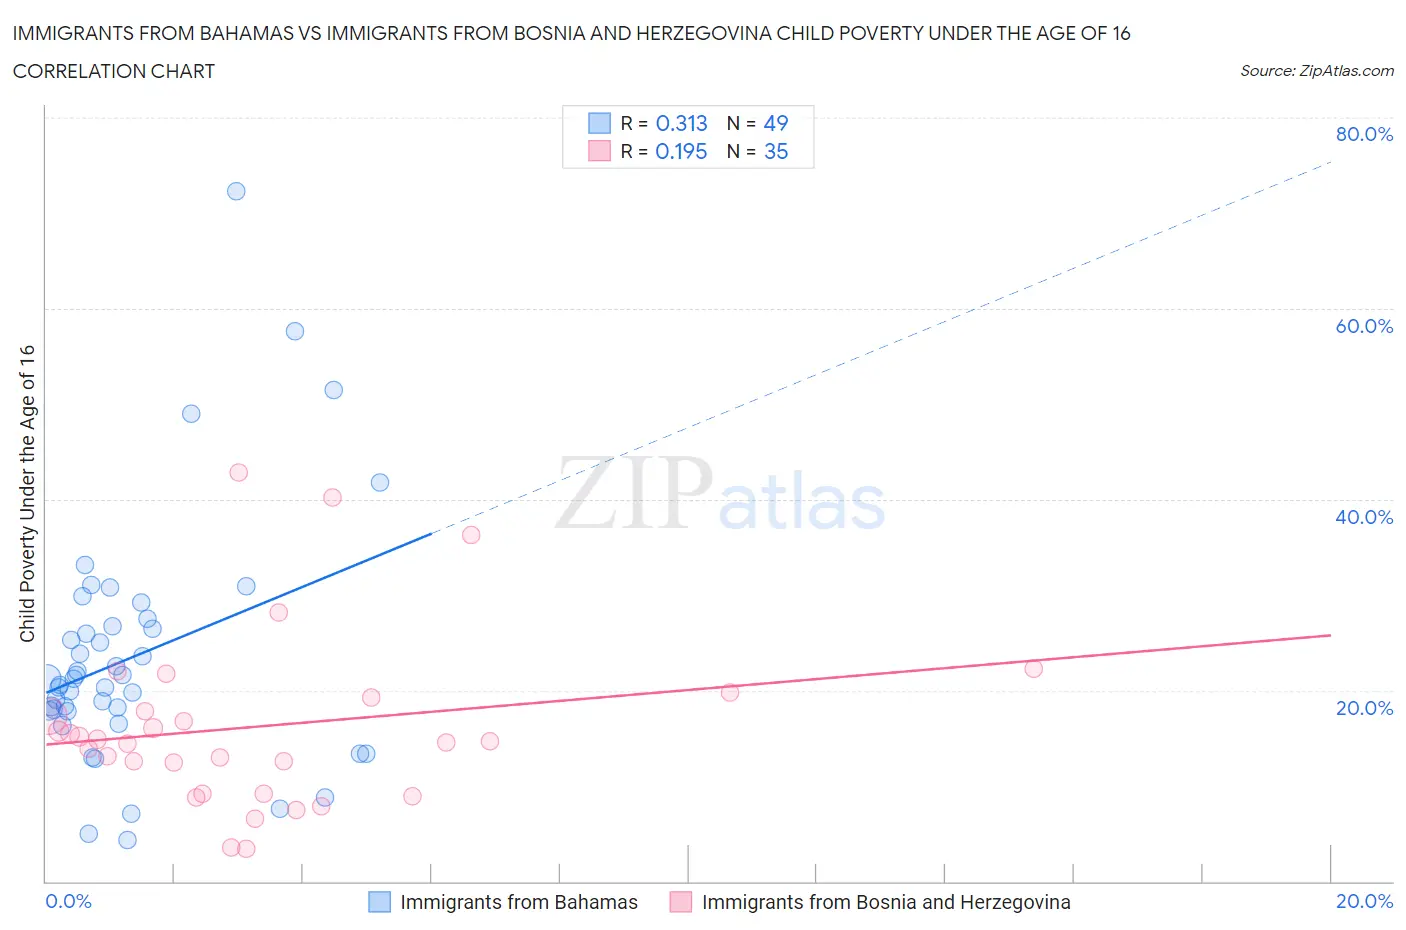 Immigrants from Bahamas vs Immigrants from Bosnia and Herzegovina Child Poverty Under the Age of 16